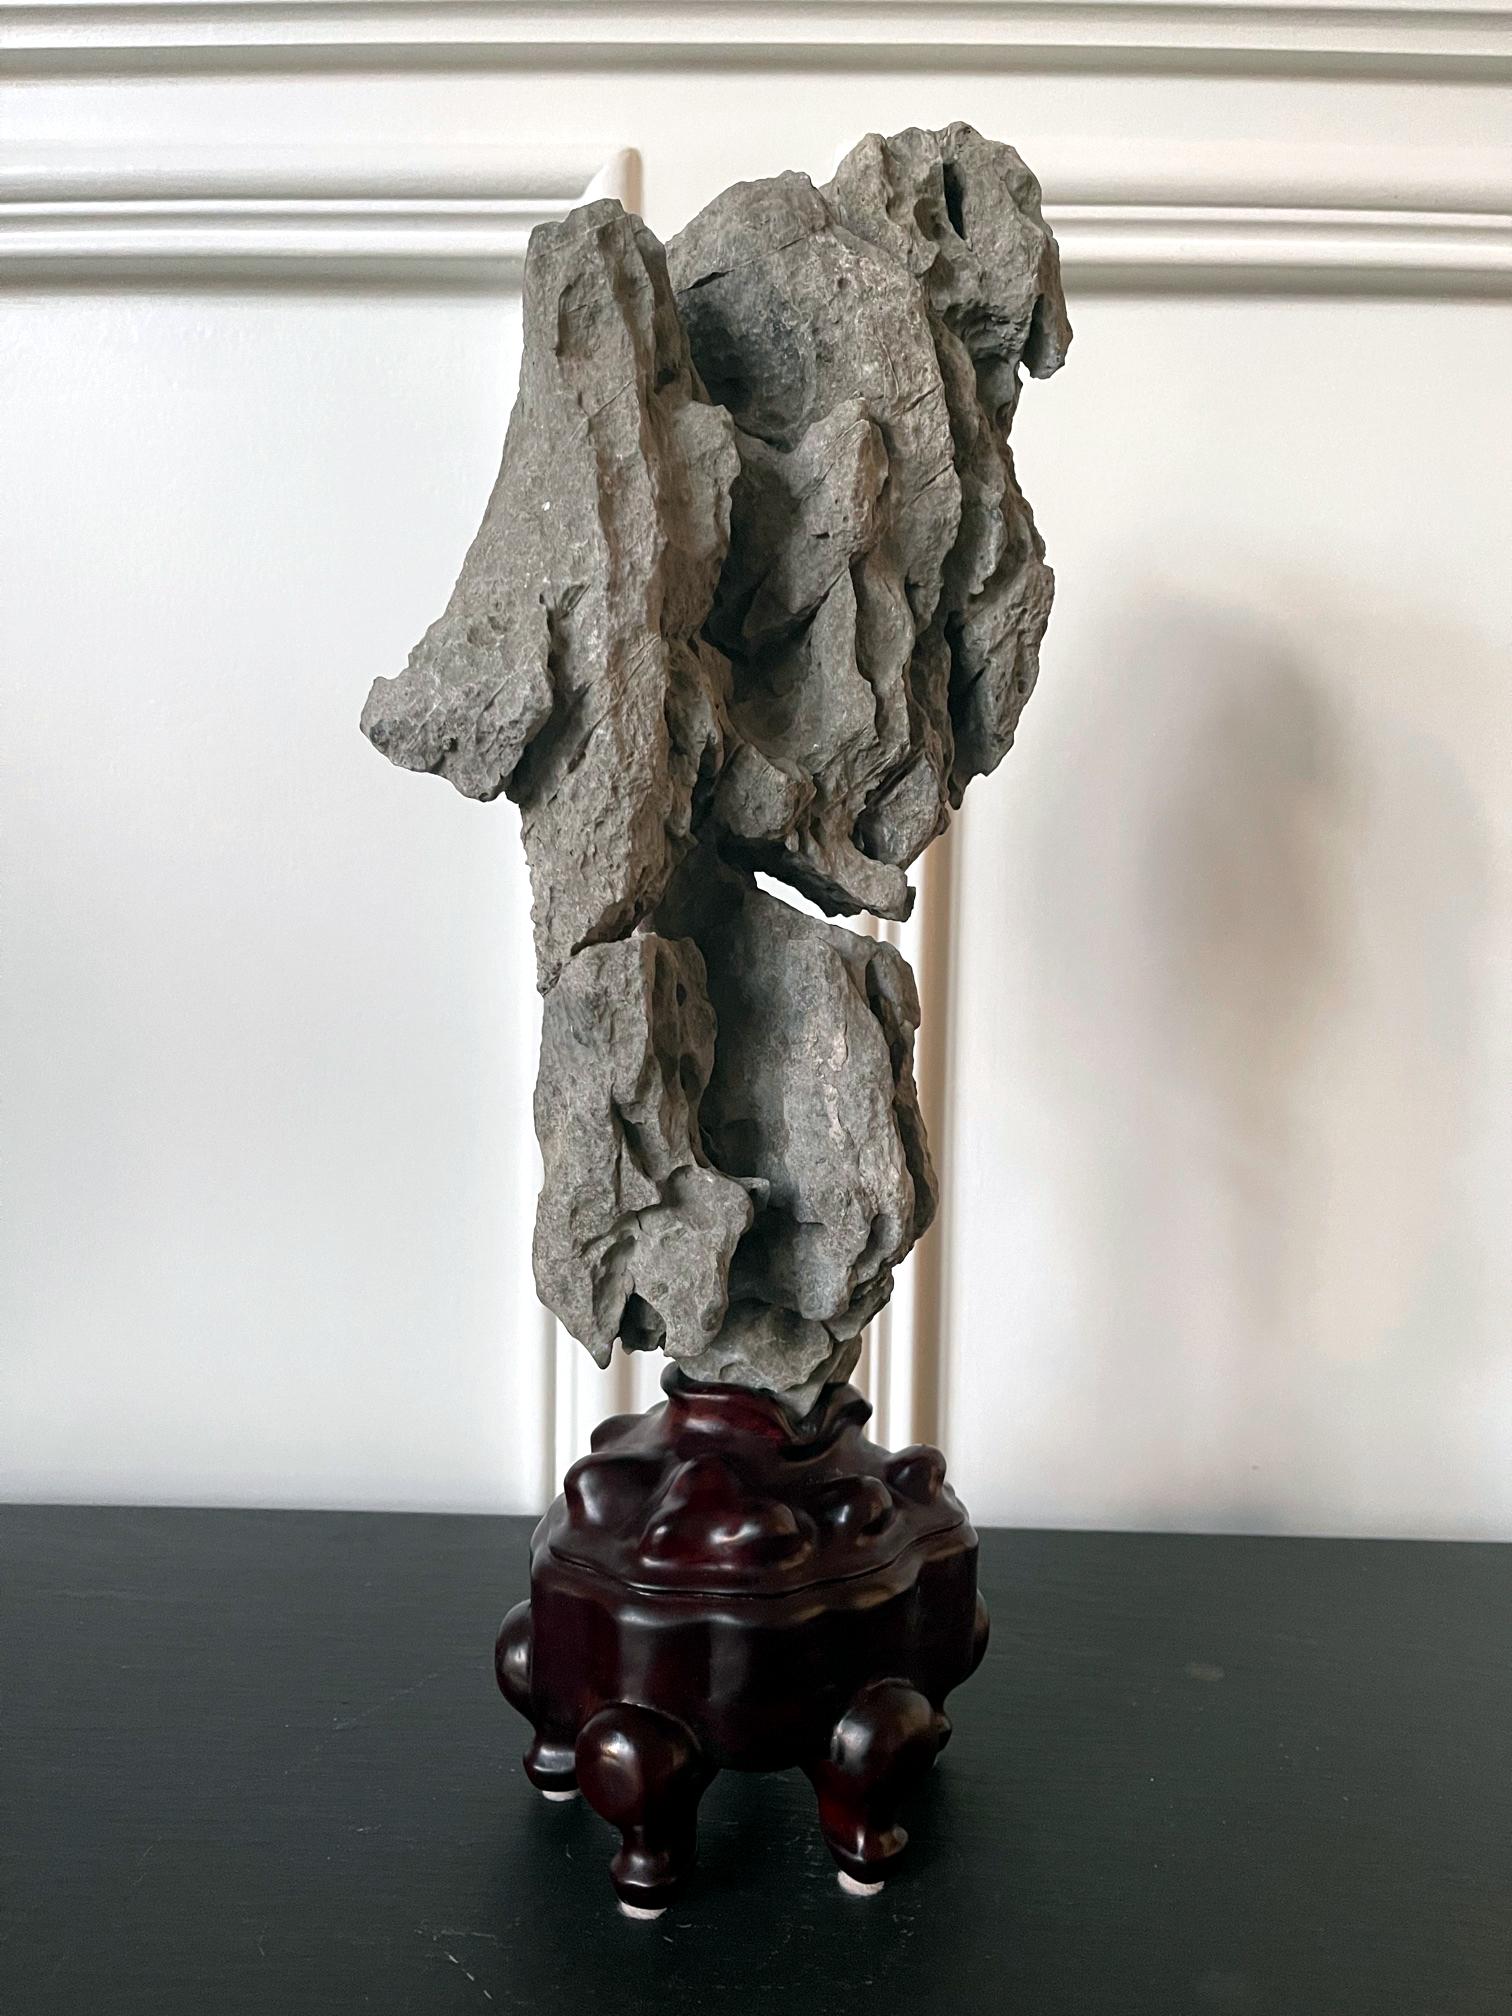 The Chinese scholar rock on offer here is a wonderful example of Yingde stone, a less common type than Lingbi or Taihu. Gray in color, it has an extraordinary upright form rising from a small stem, like an 